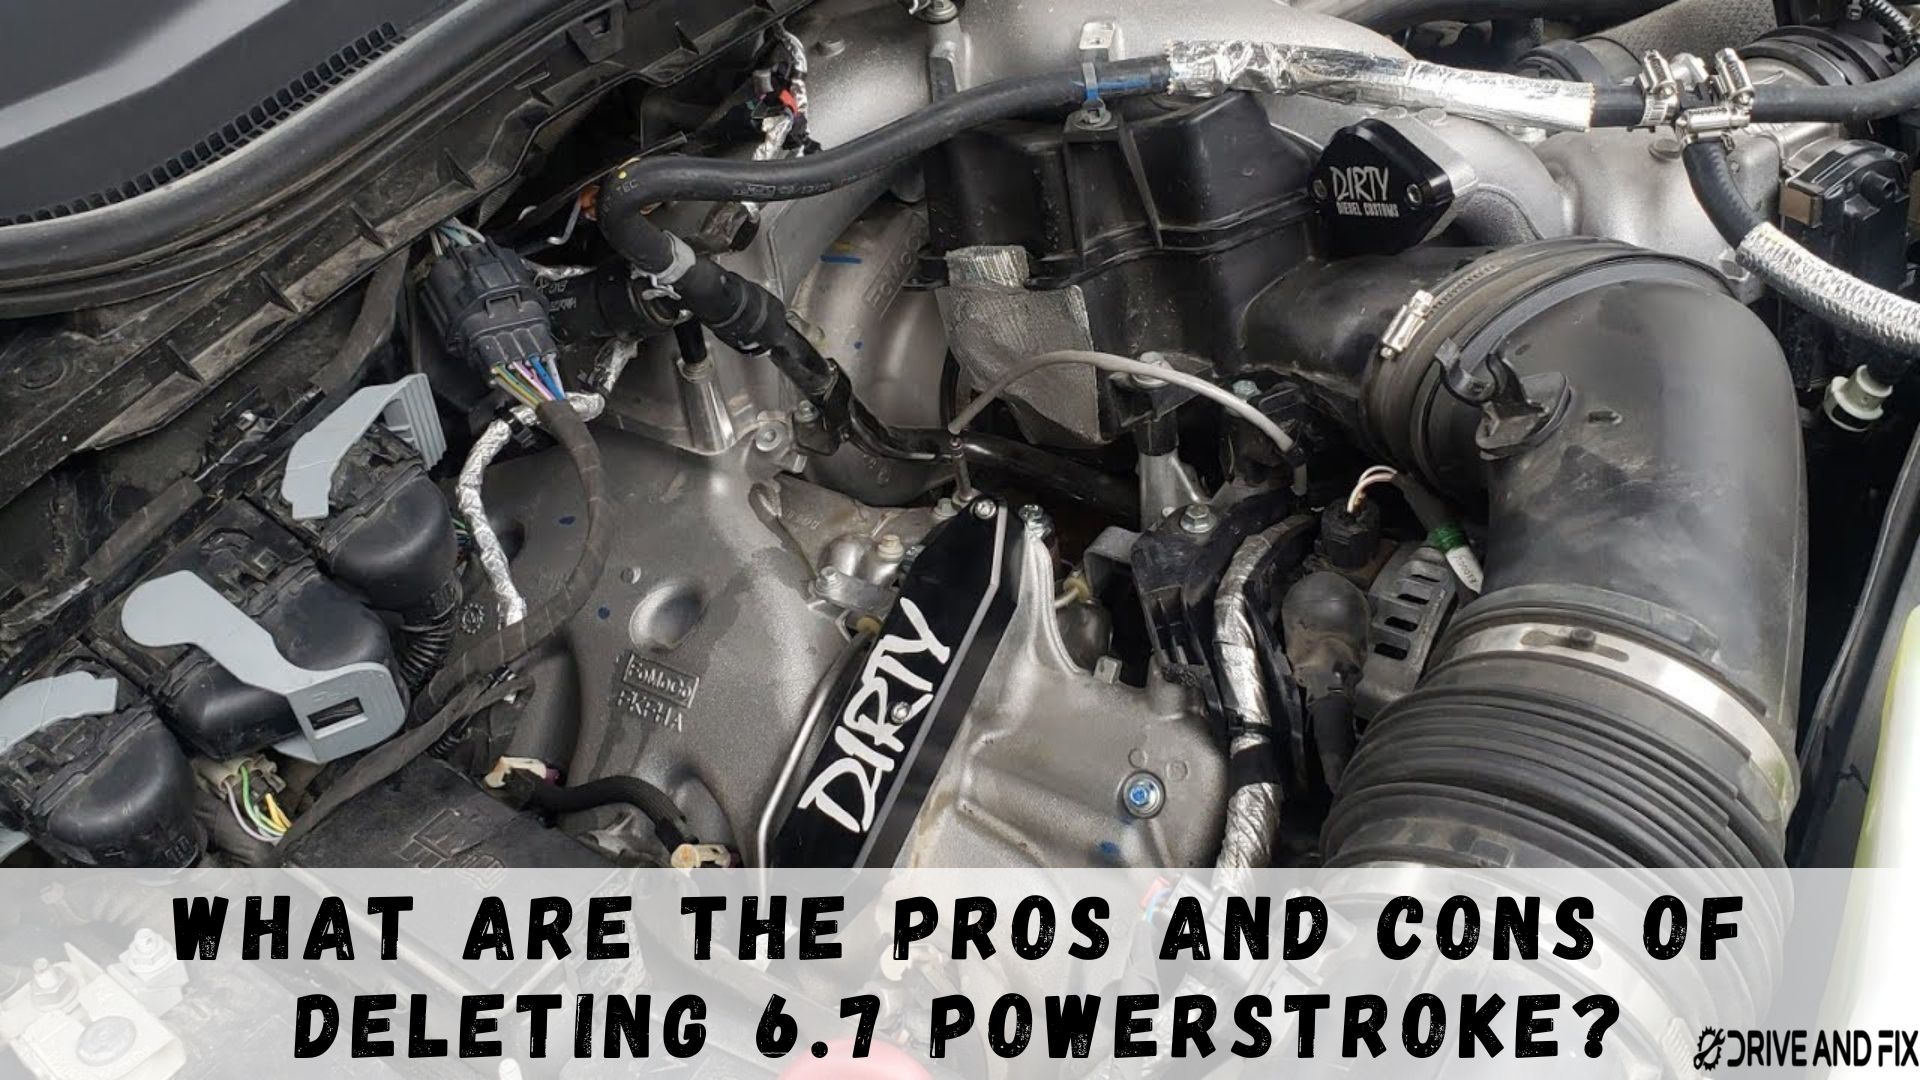 pros and cons of deleting 6.7 powerstroke